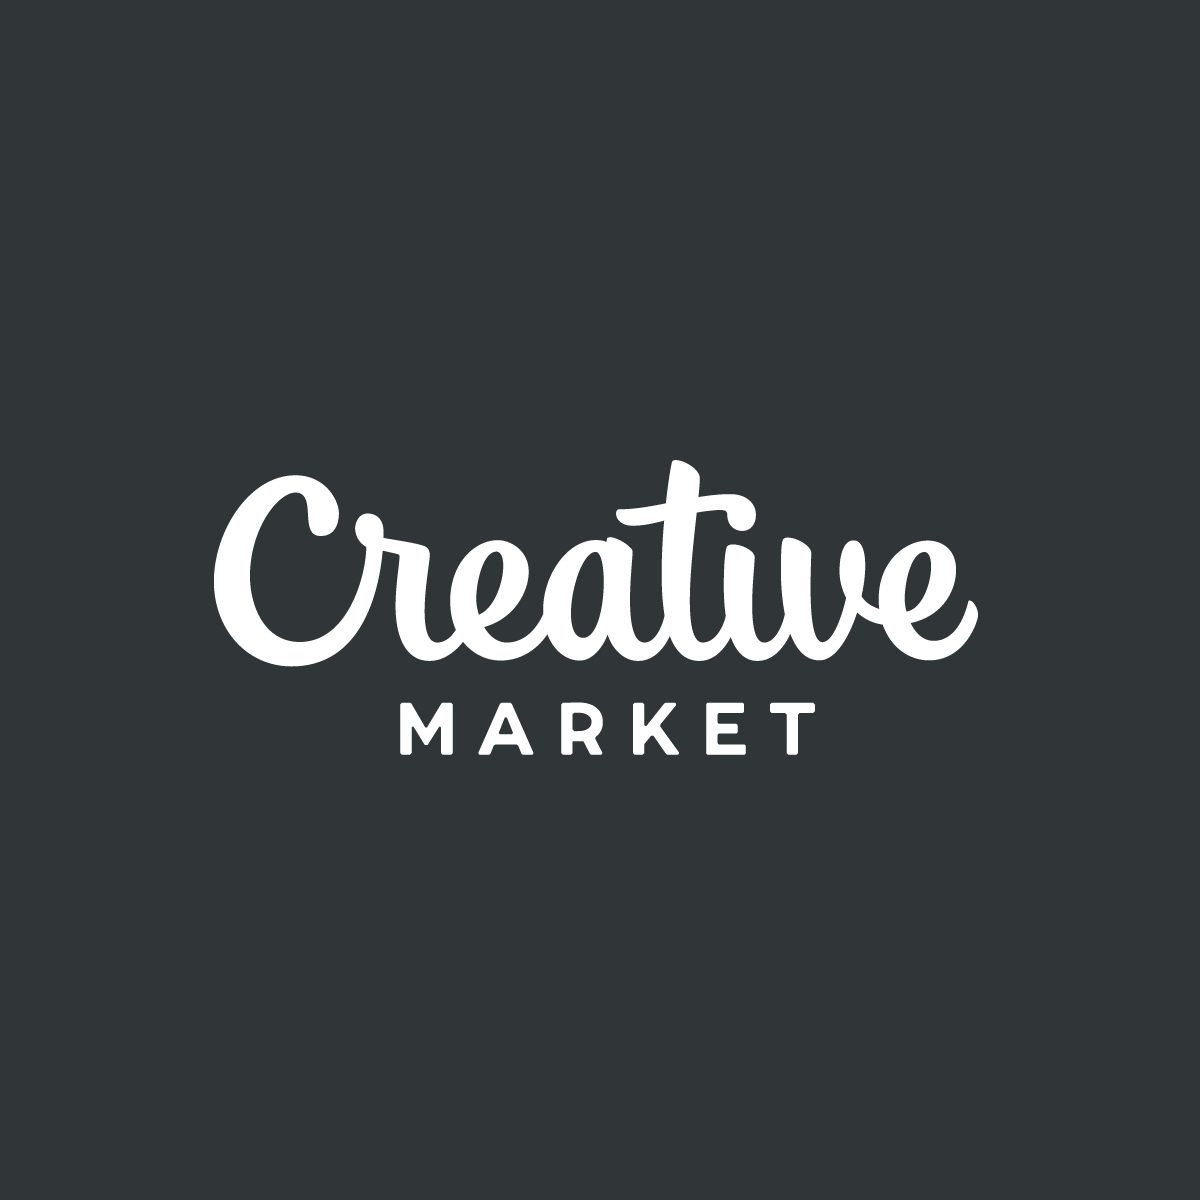 Download Free Fonts Graphics Themes And More Creative Market PSD Mockup Template